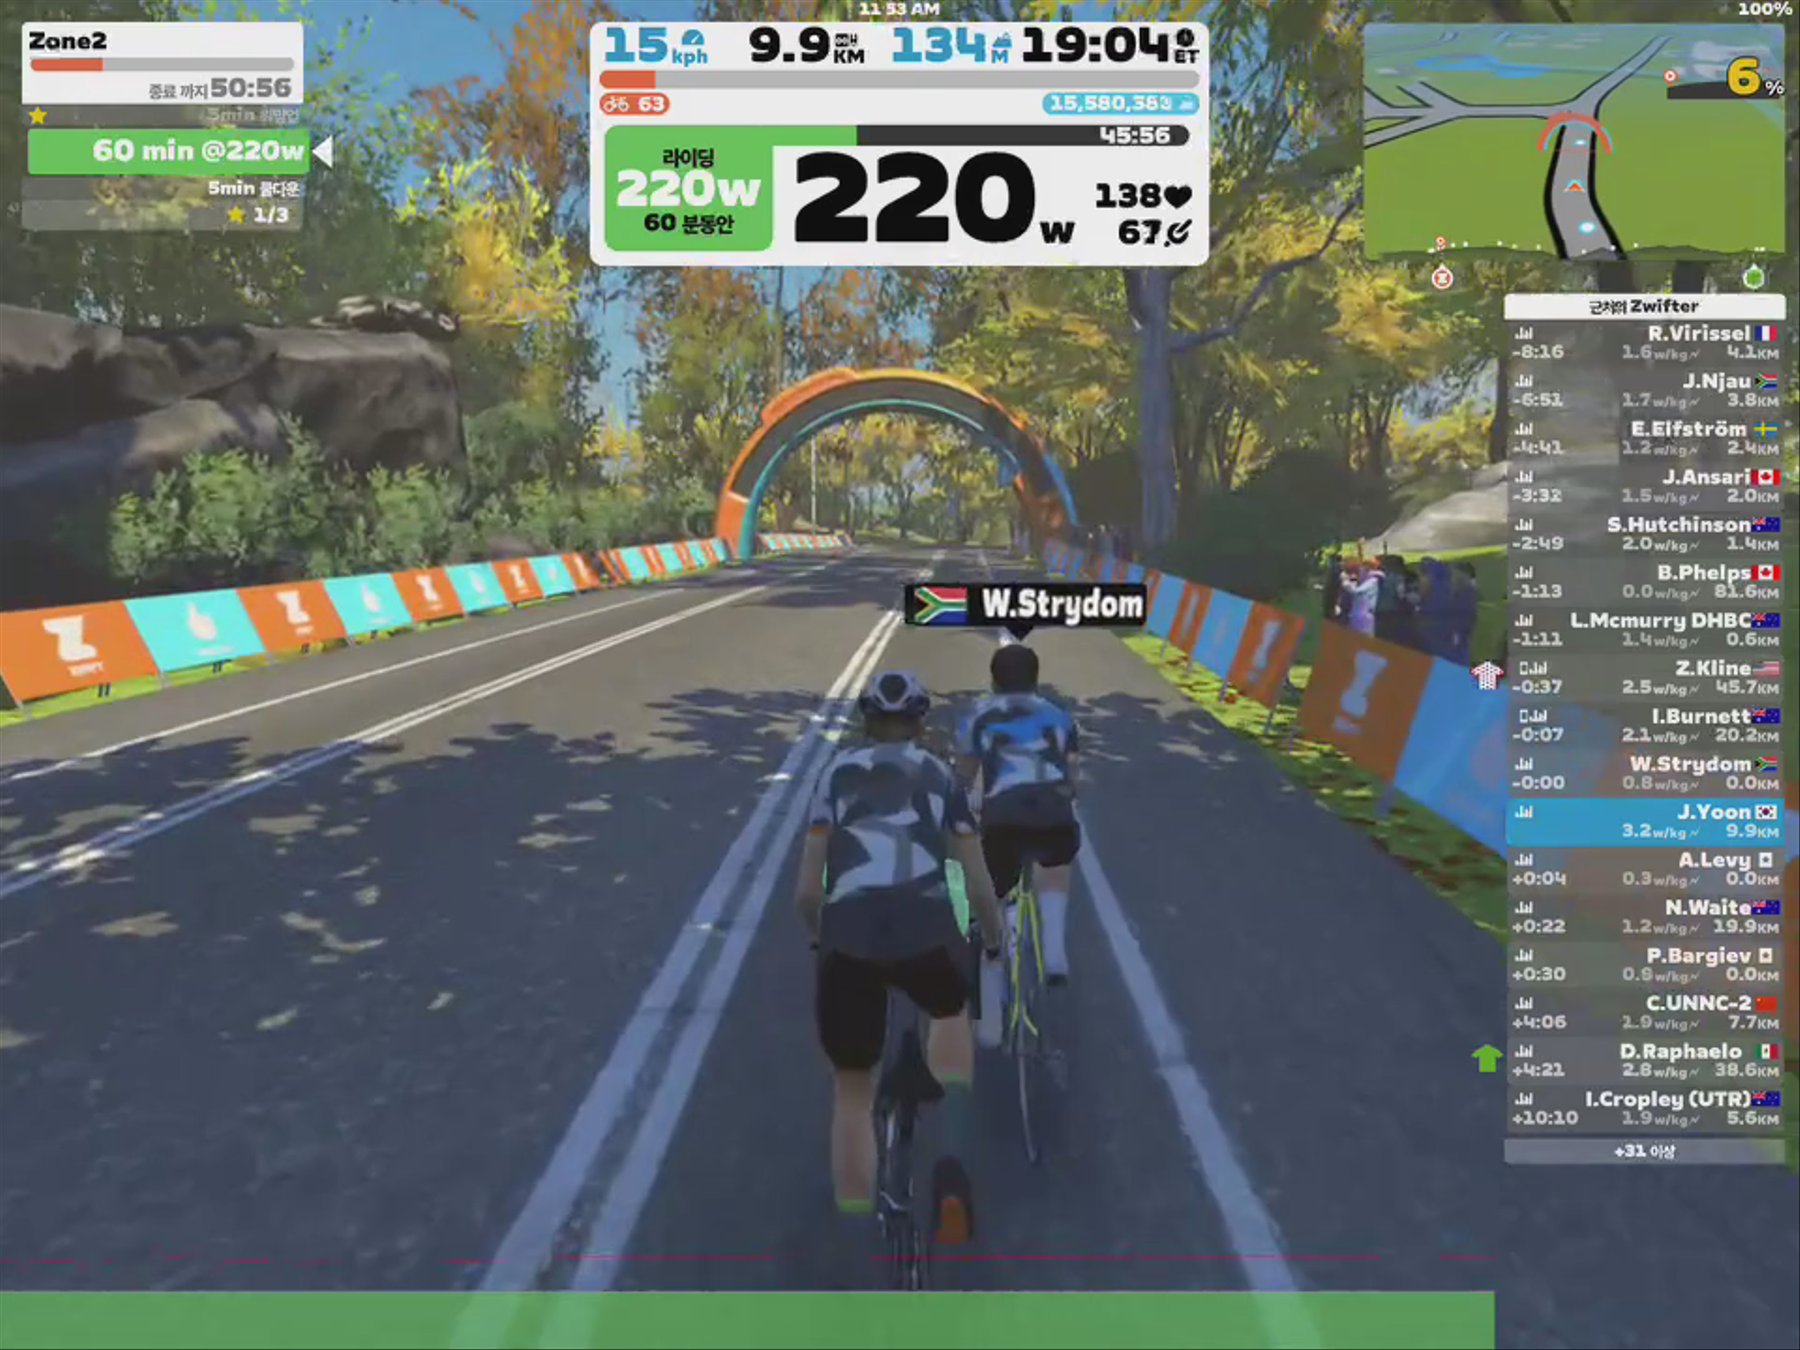 Zwift - Zone2 on Classique in New York